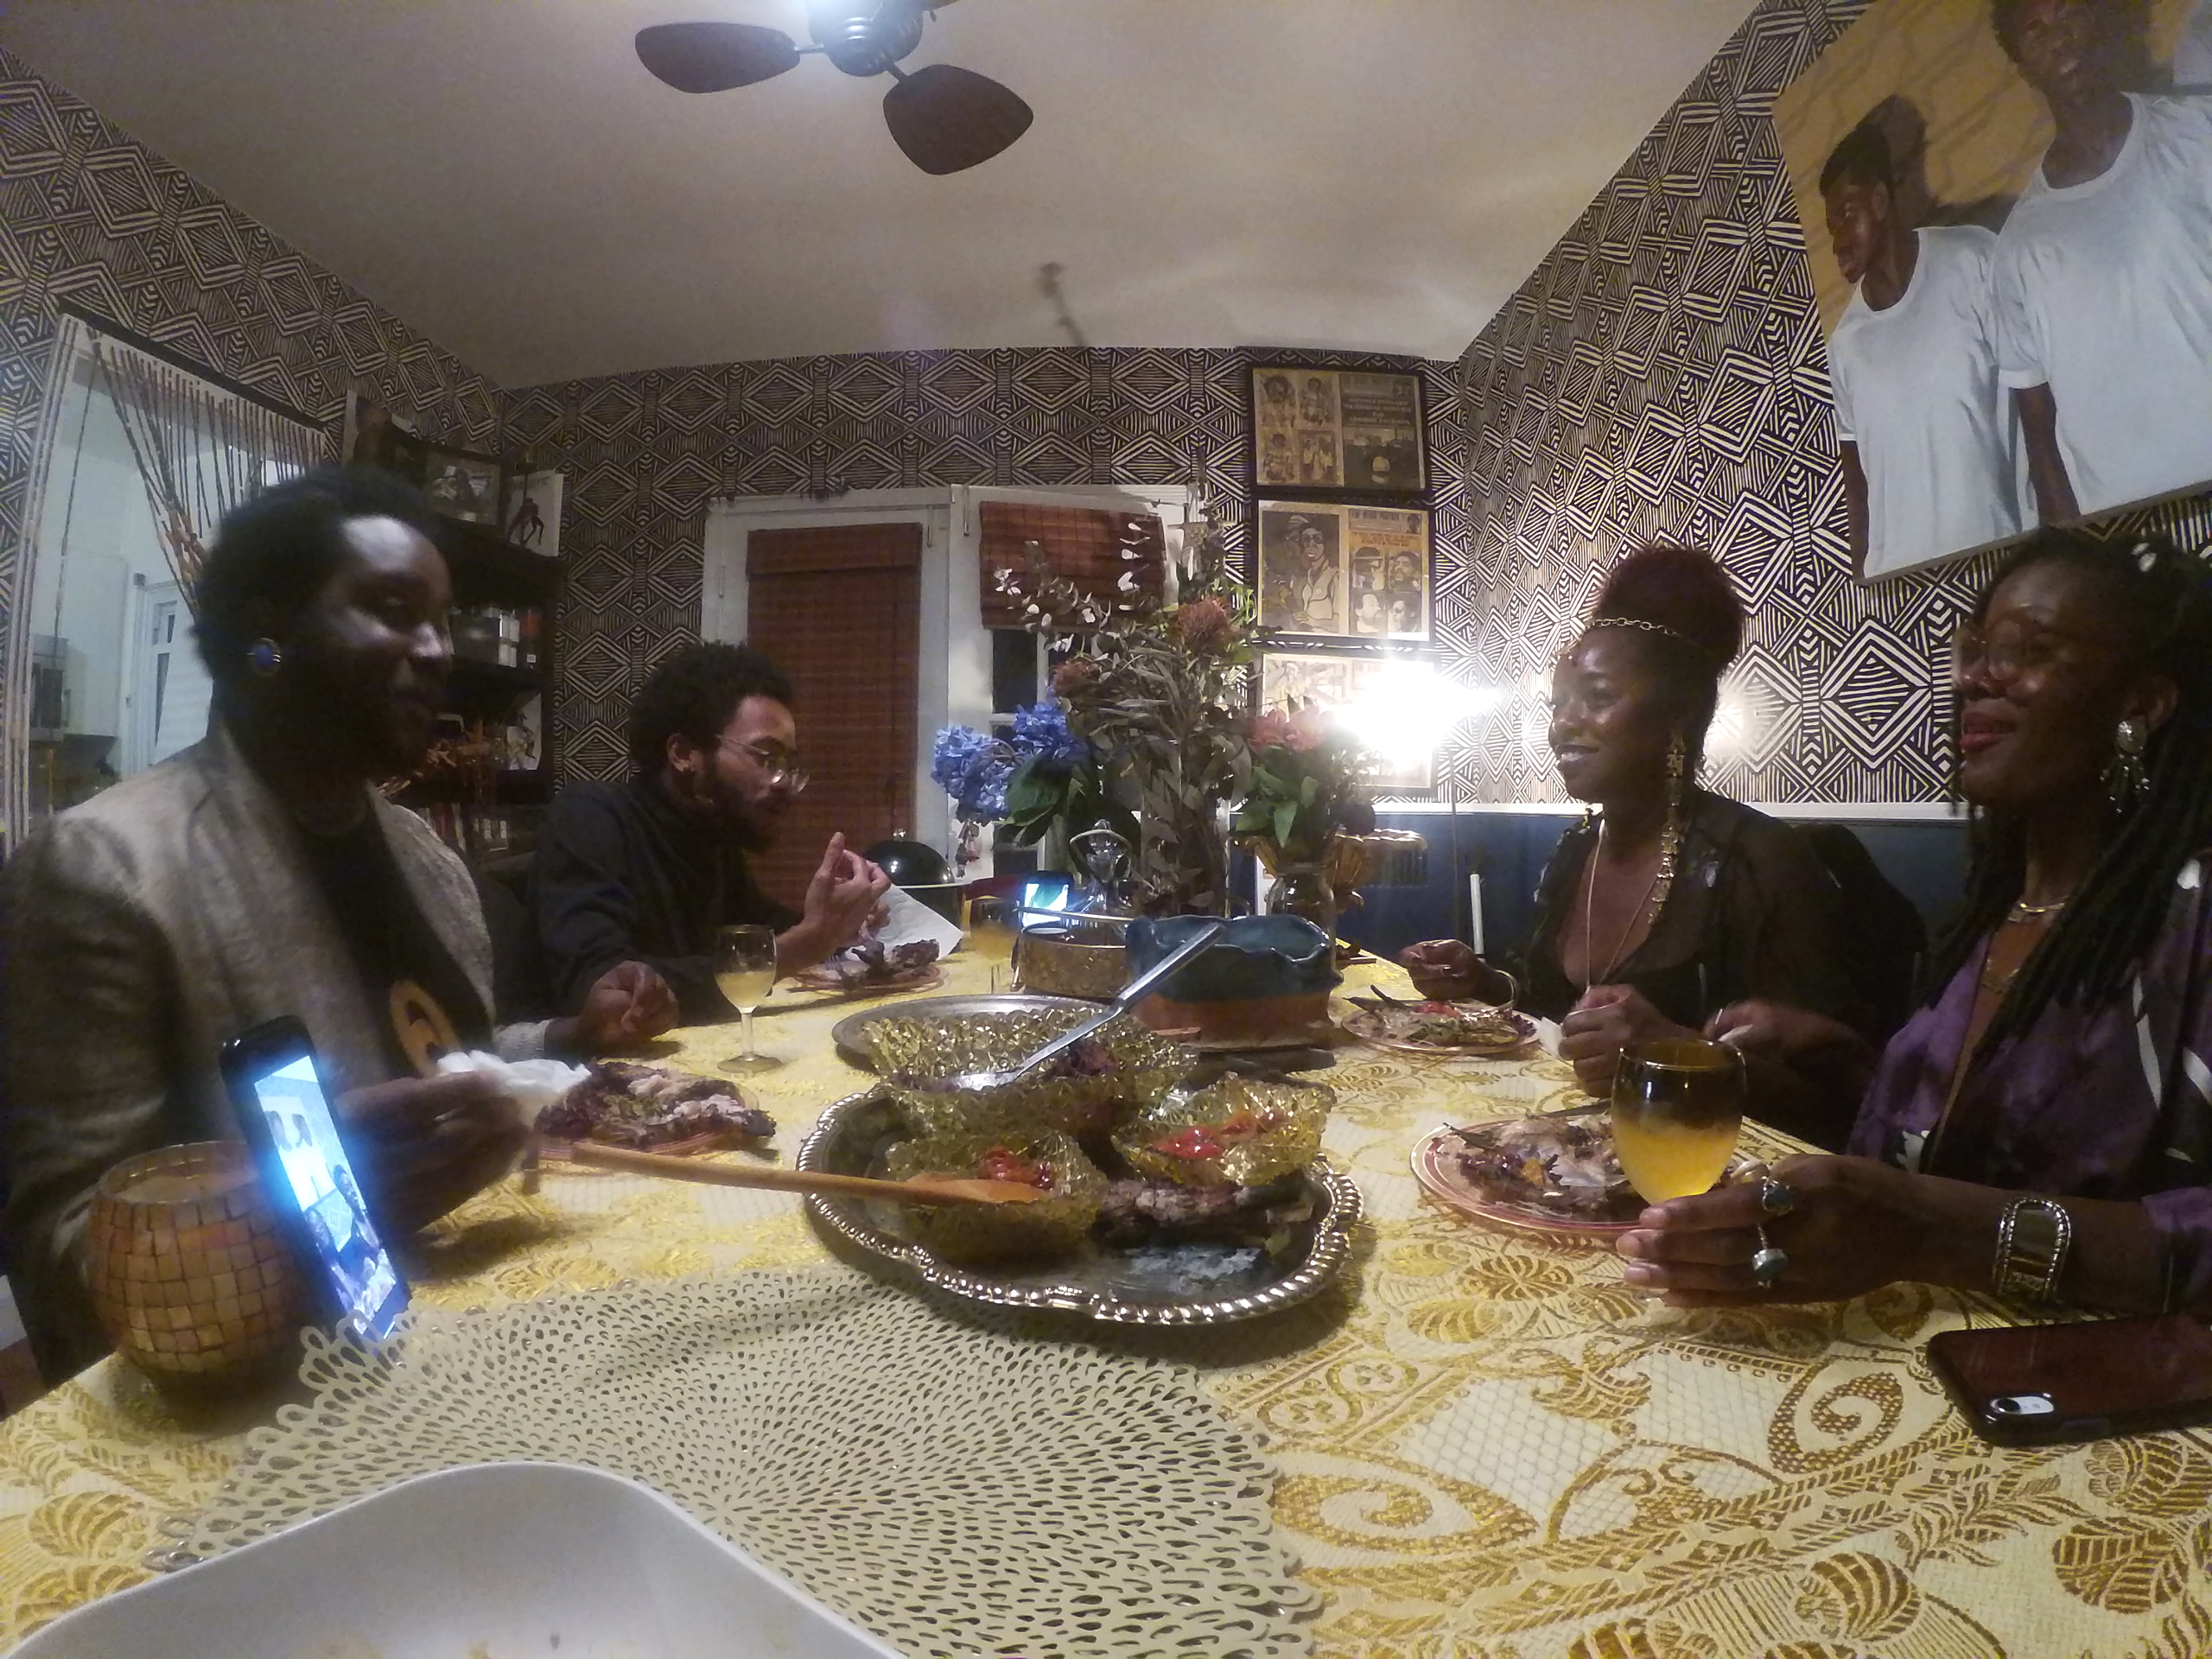 Four dark-skinned adults dressed up in suit jackets, nice tops, and jewelry sit around a table set with a yellow patterned tablecloth and meal, two on each side. A phone stands on the table, displaying other people calling in. The walls are covered in art and patterned wallpaper.